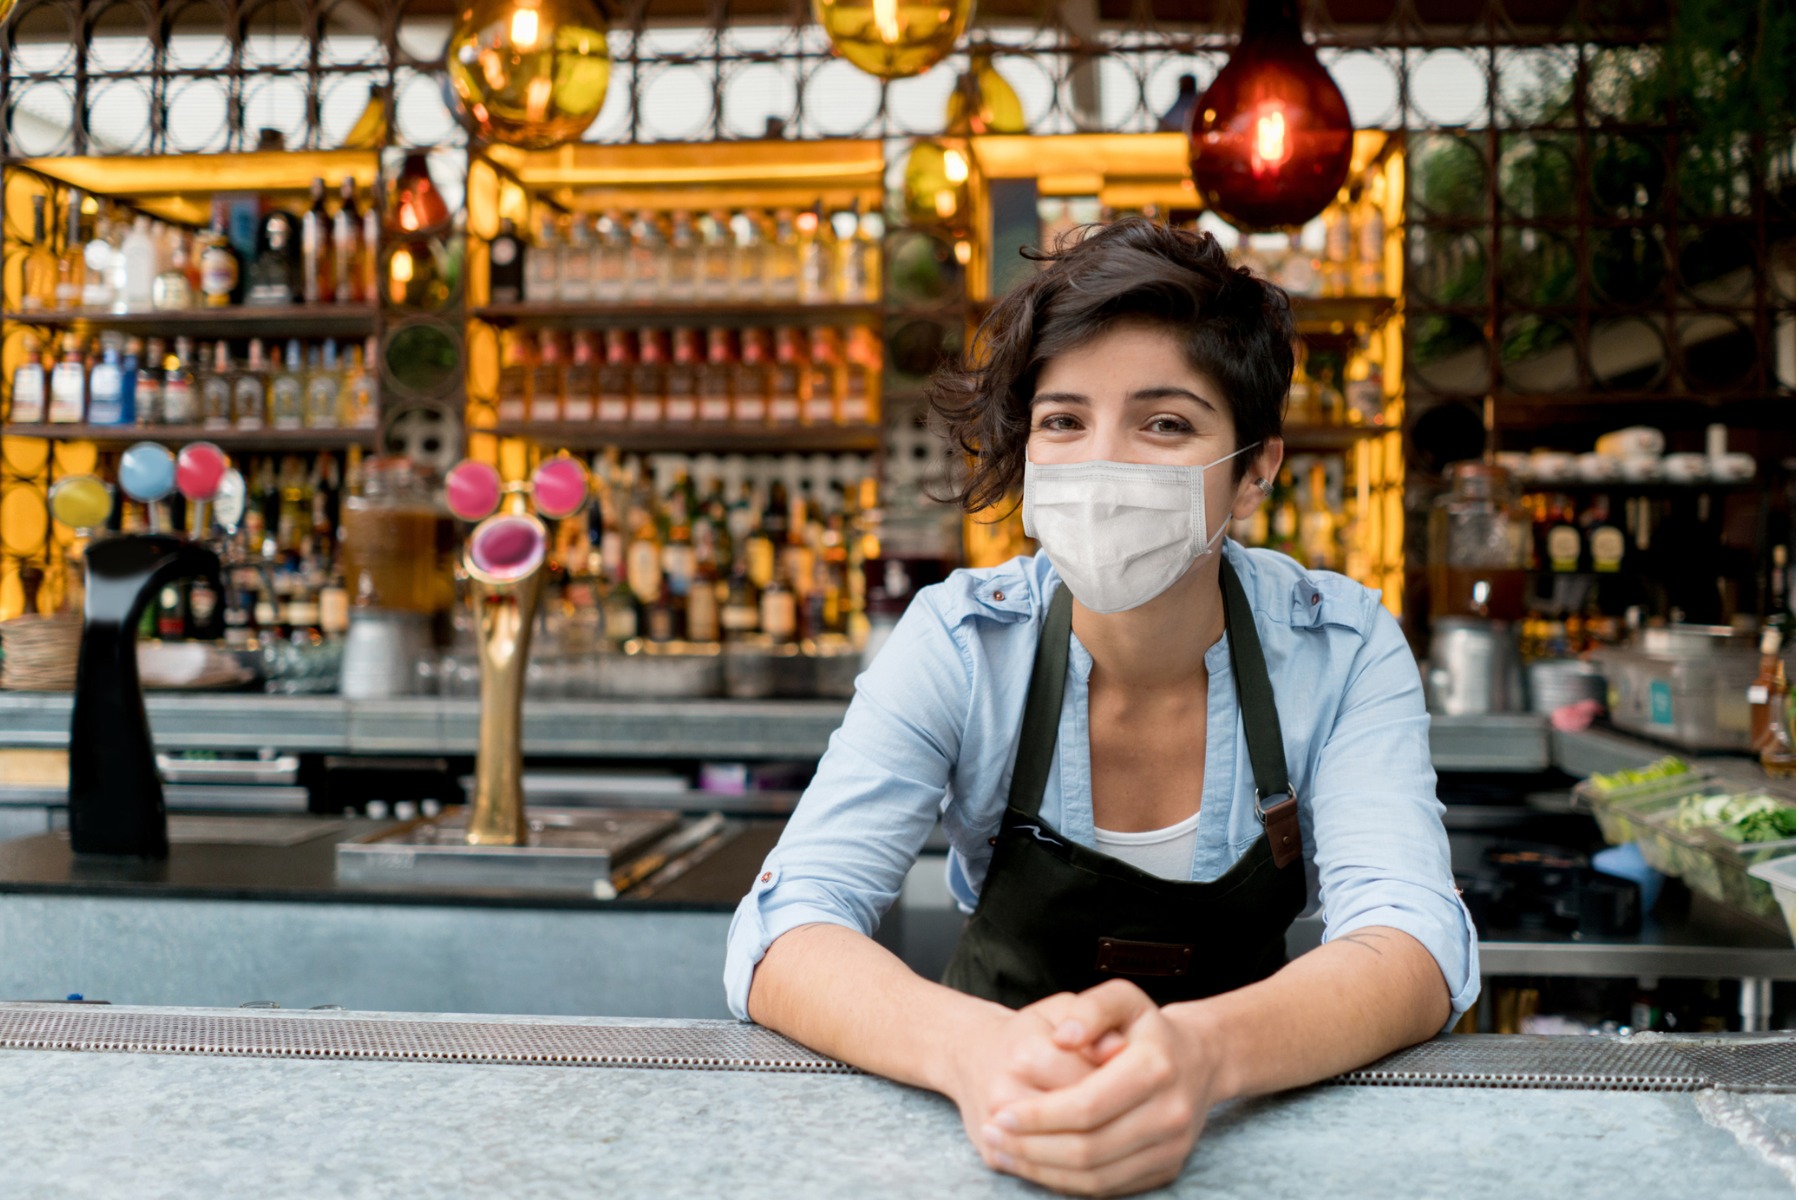 Waitress leaning over the bar with a mask on